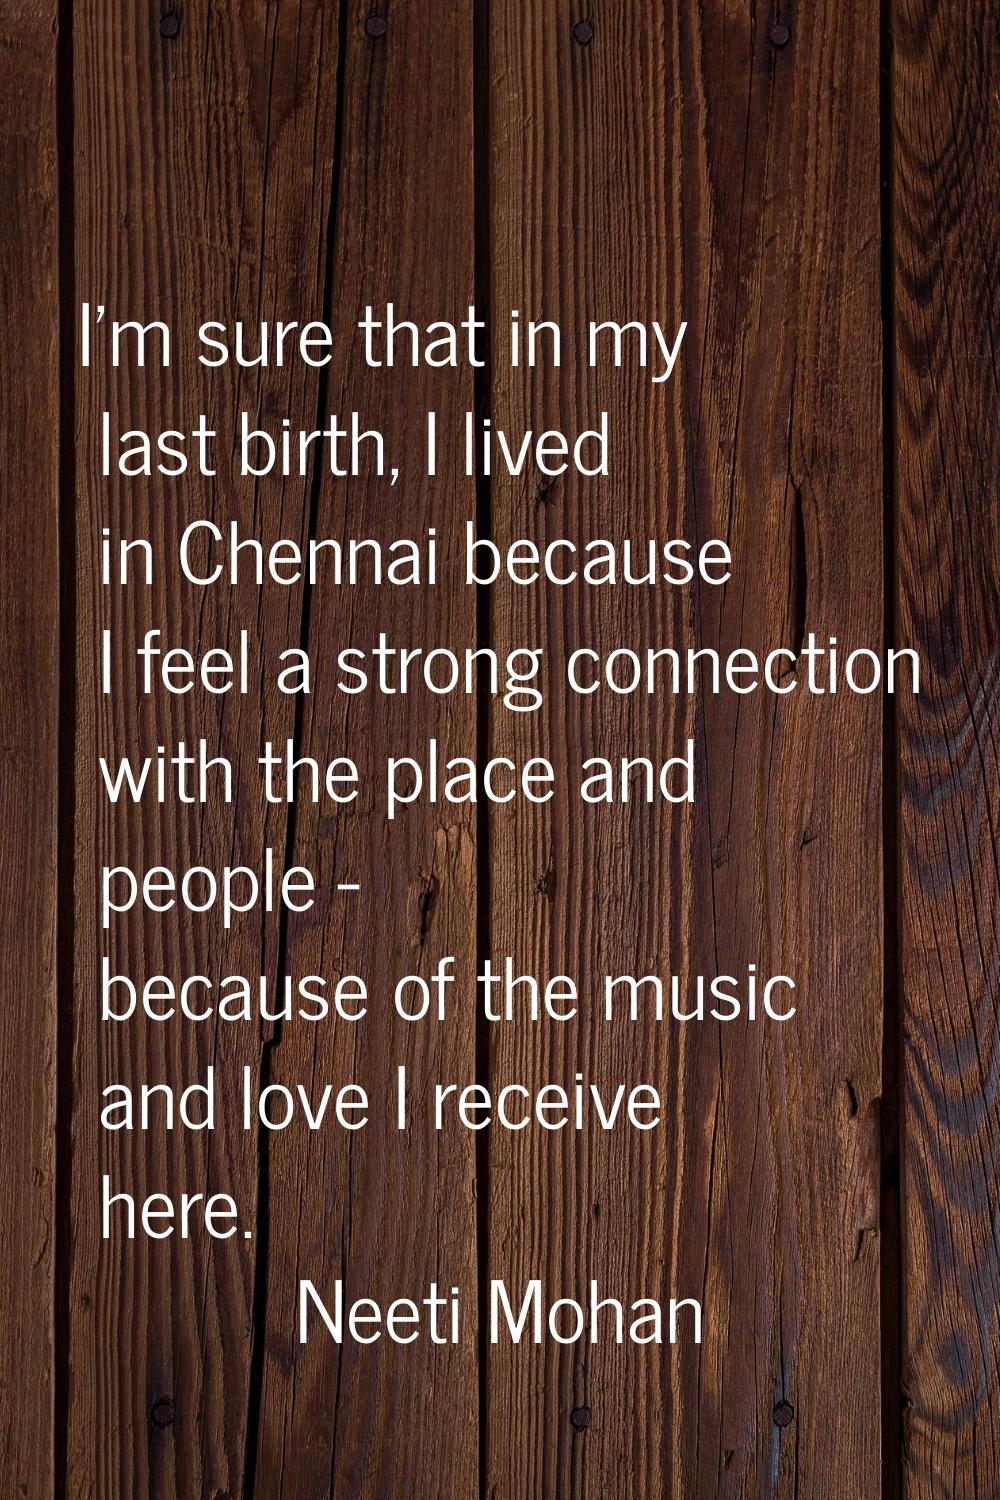 I'm sure that in my last birth, I lived in Chennai because I feel a strong connection with the plac